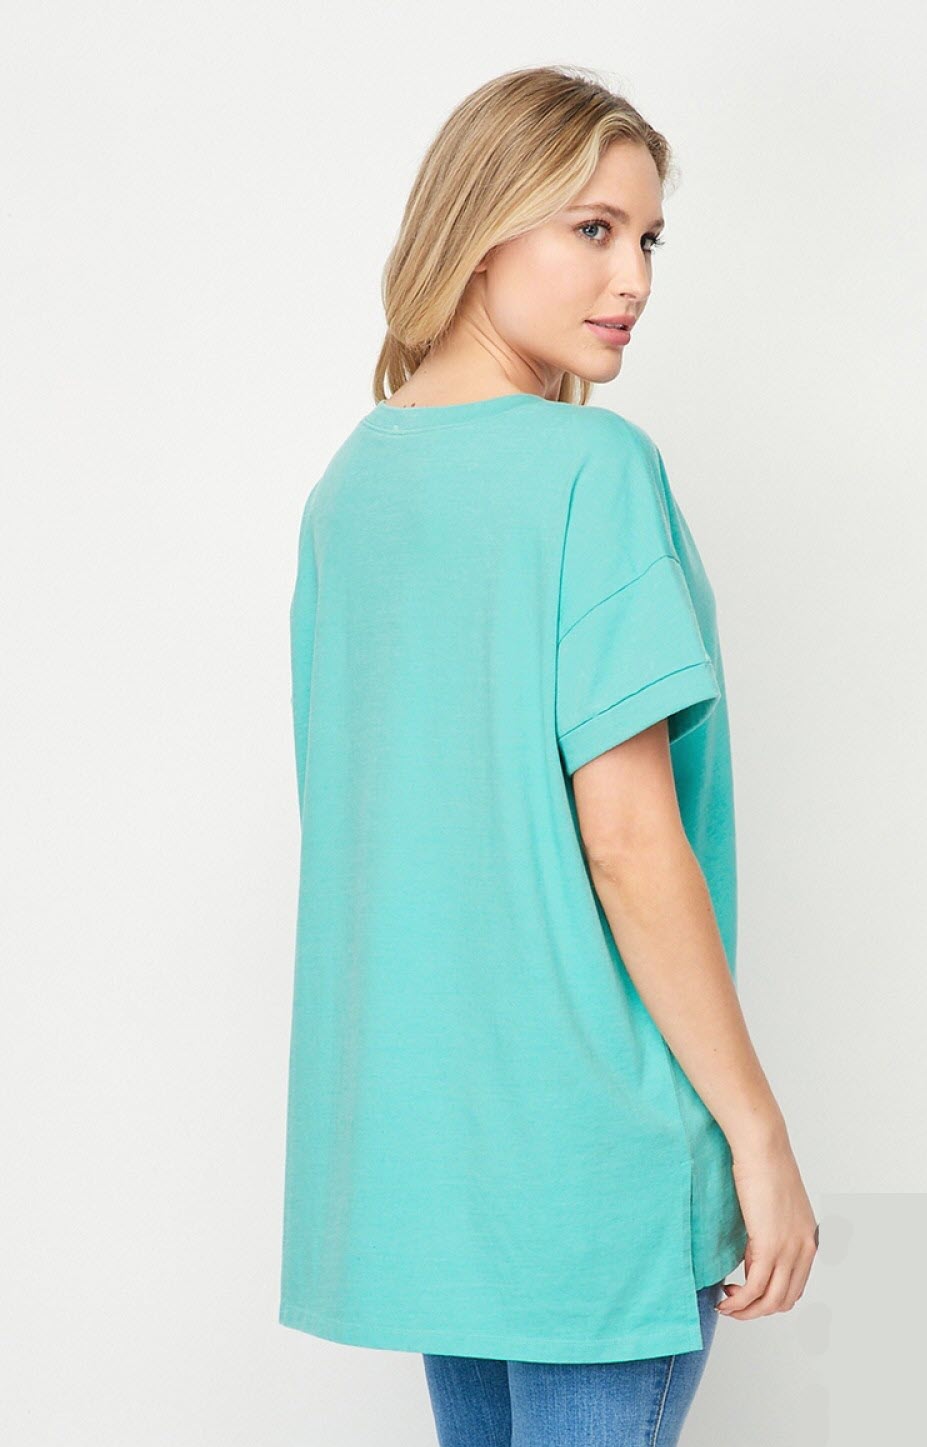 Mineral Wash Cuffed Sleeve Pocket Top  Ivy and Pearl Boutique   